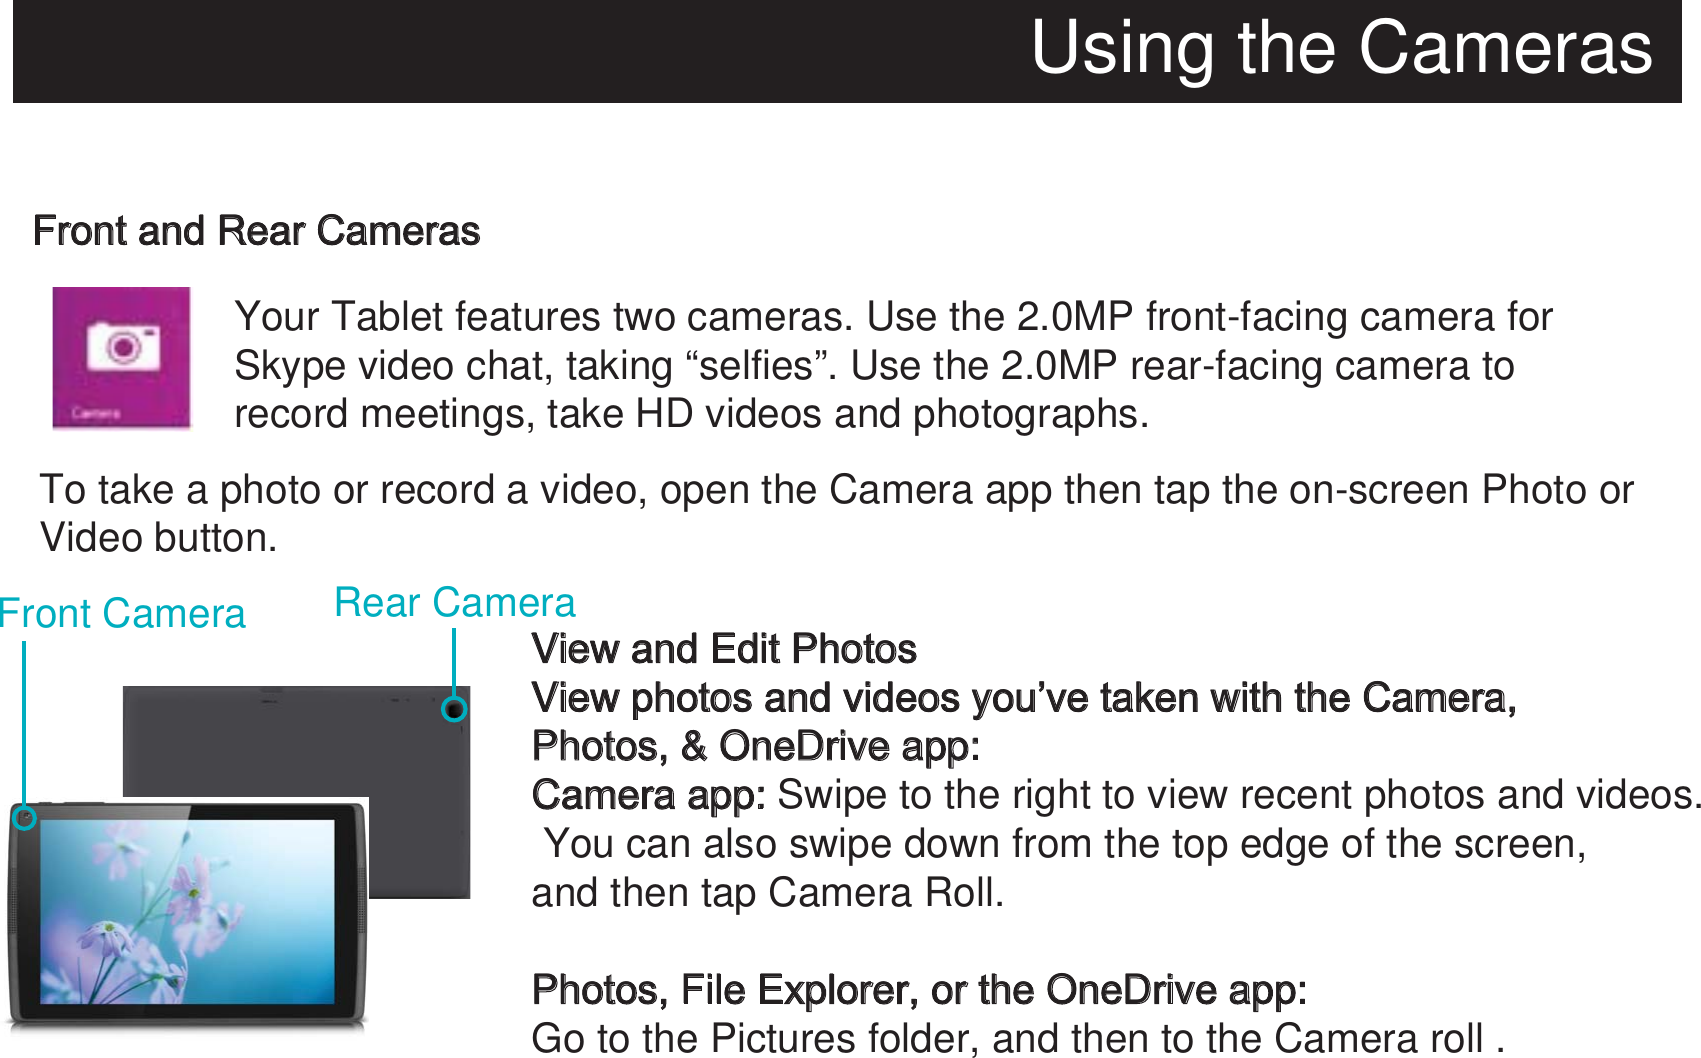 Using the CamerasFront and Rear Cameras  Your Tablet features two cameras. Use the 2.0MP front-facing camera for Skype video chat, taking “selfies”. Use the 2.0MP rear-facing camera to record meetings, take HD videos and photographs.To take a photo or record a video, open the Camera app then tap the on-screen Photo or Video button.View and Edit PhotosView photos and videos you’ve taken with the Camera, Photos, &amp; OneDrive app:Camera app: Swipe to the right to view recent photos and videos. You can also swipe down from the top edge of the screen, and then tap Camera Roll.Photos, File Explorer, or the OneDrive app:Go to the Pictures folder, and then to the Camera roll .Front Camera Rear Camera